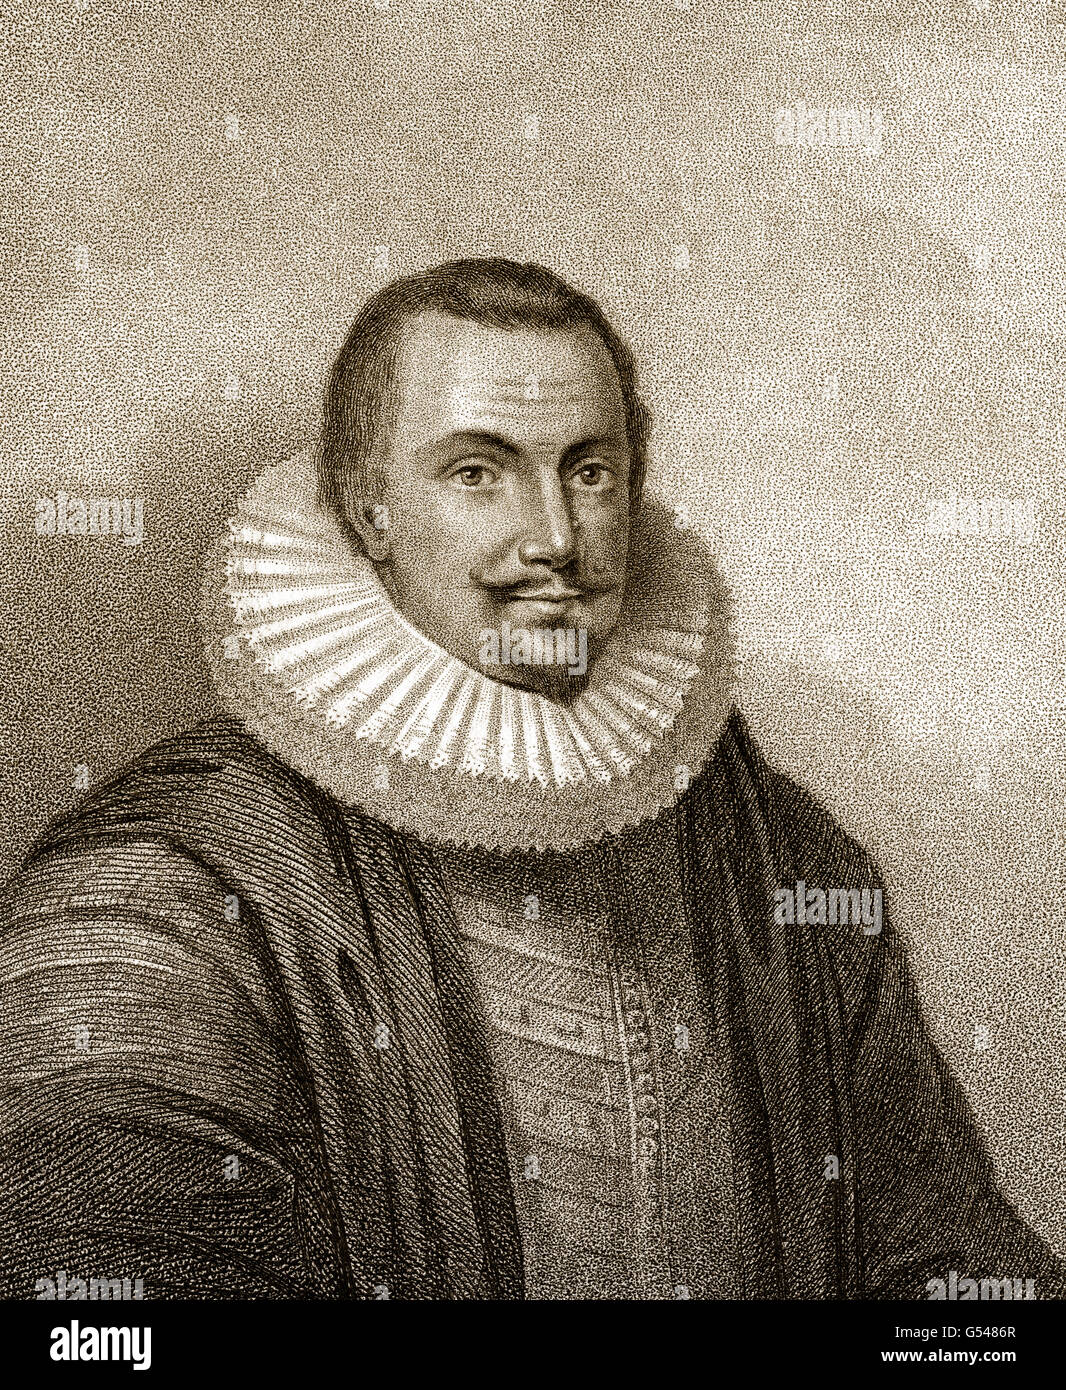 Thomas Coventry, 1st Baron Coventry, 1578-1640, a prominent English lawyer, politician and judge Stock Photo